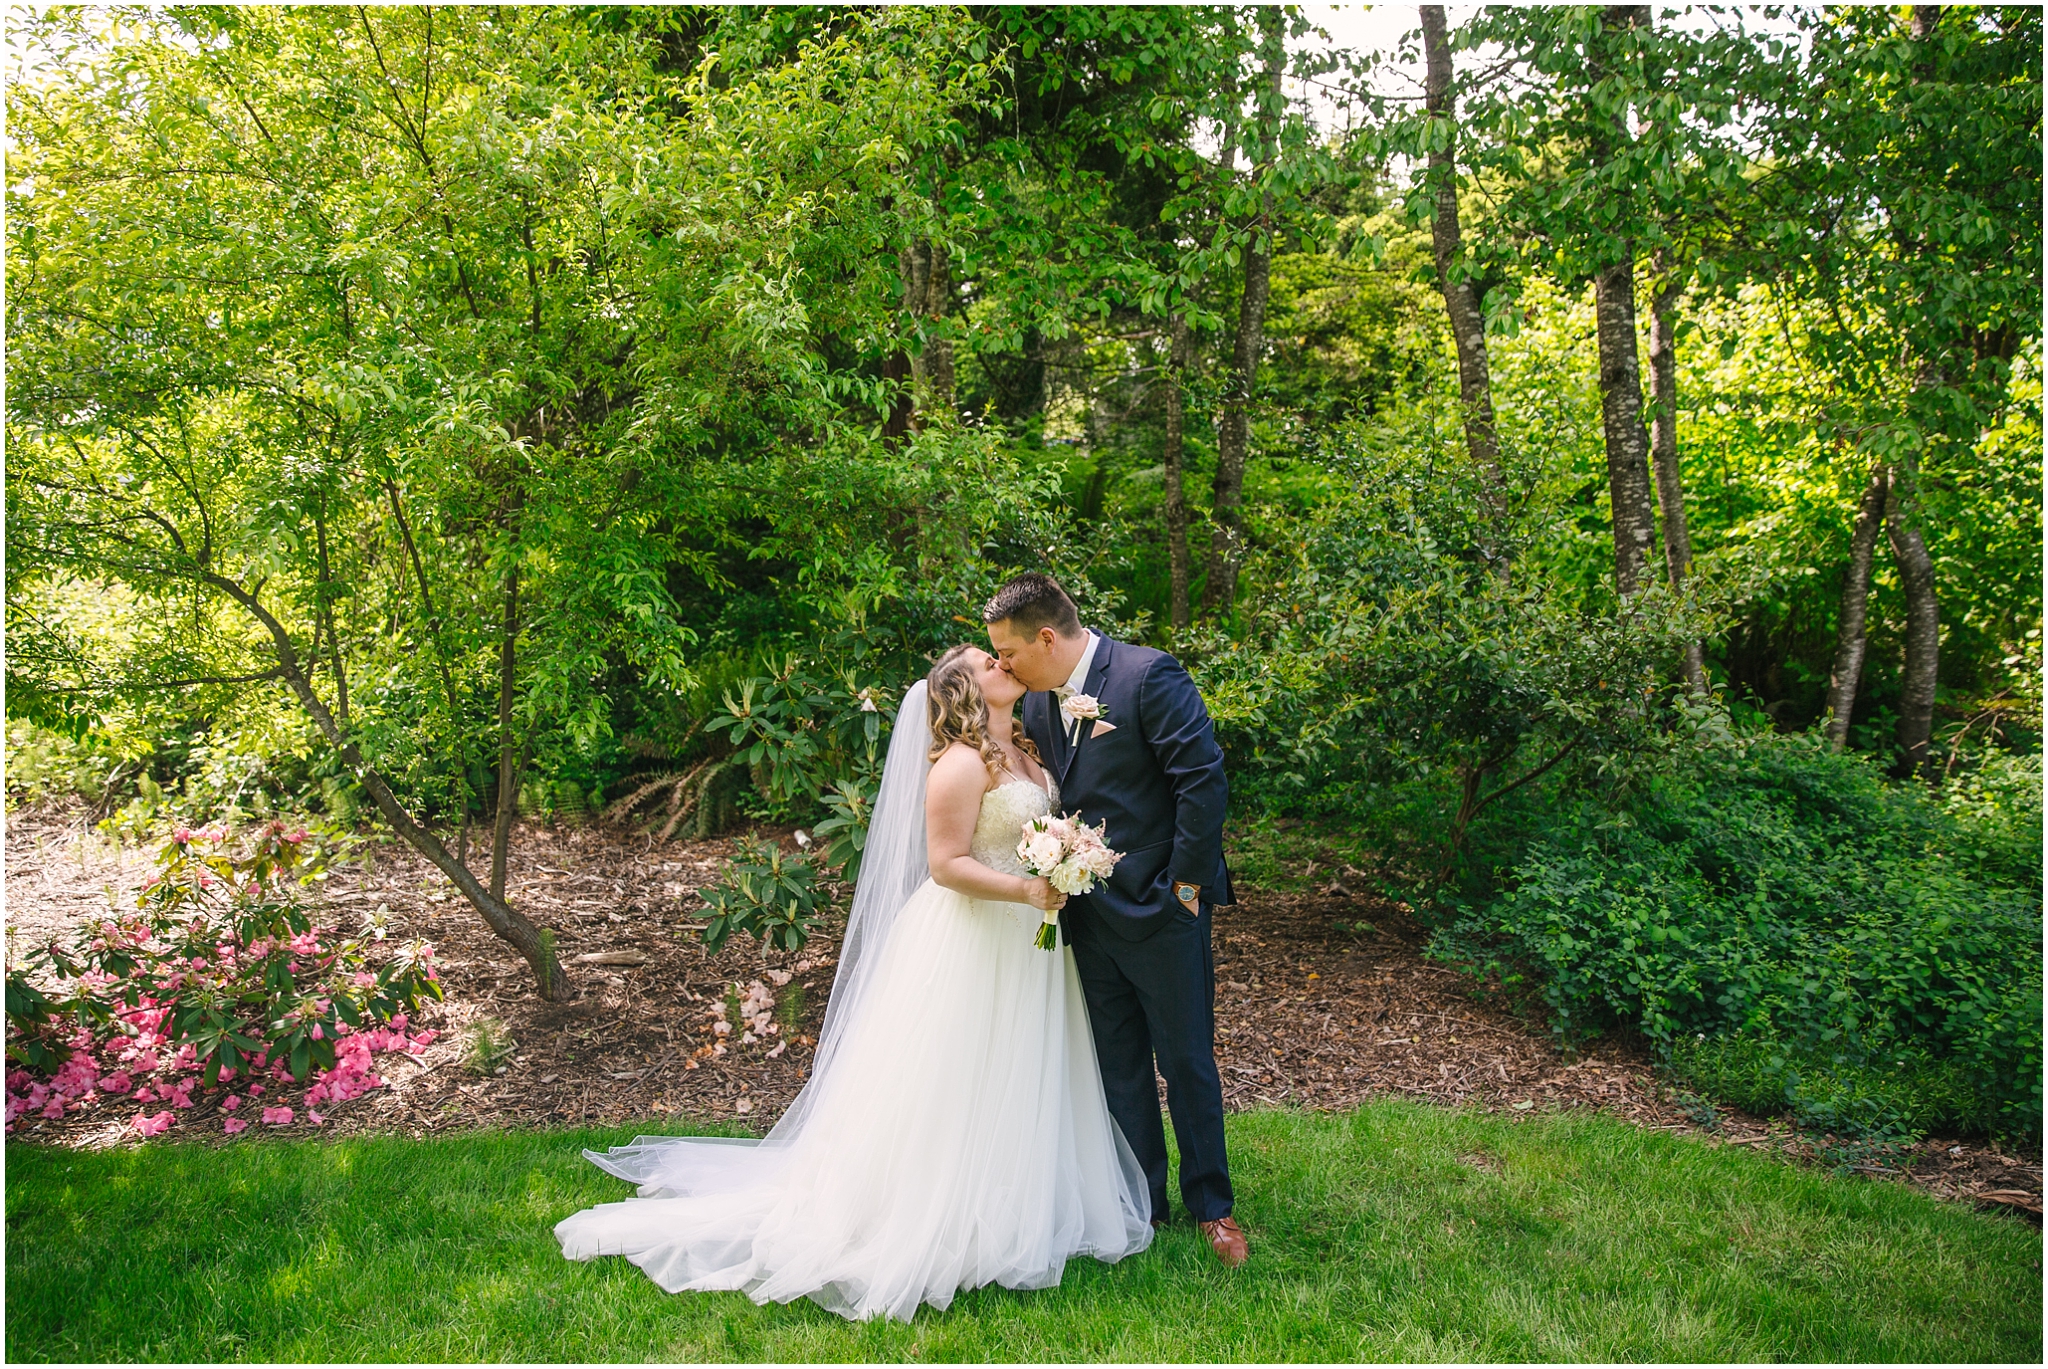 Bride and groom kissing under the trees in Issaquah Washington